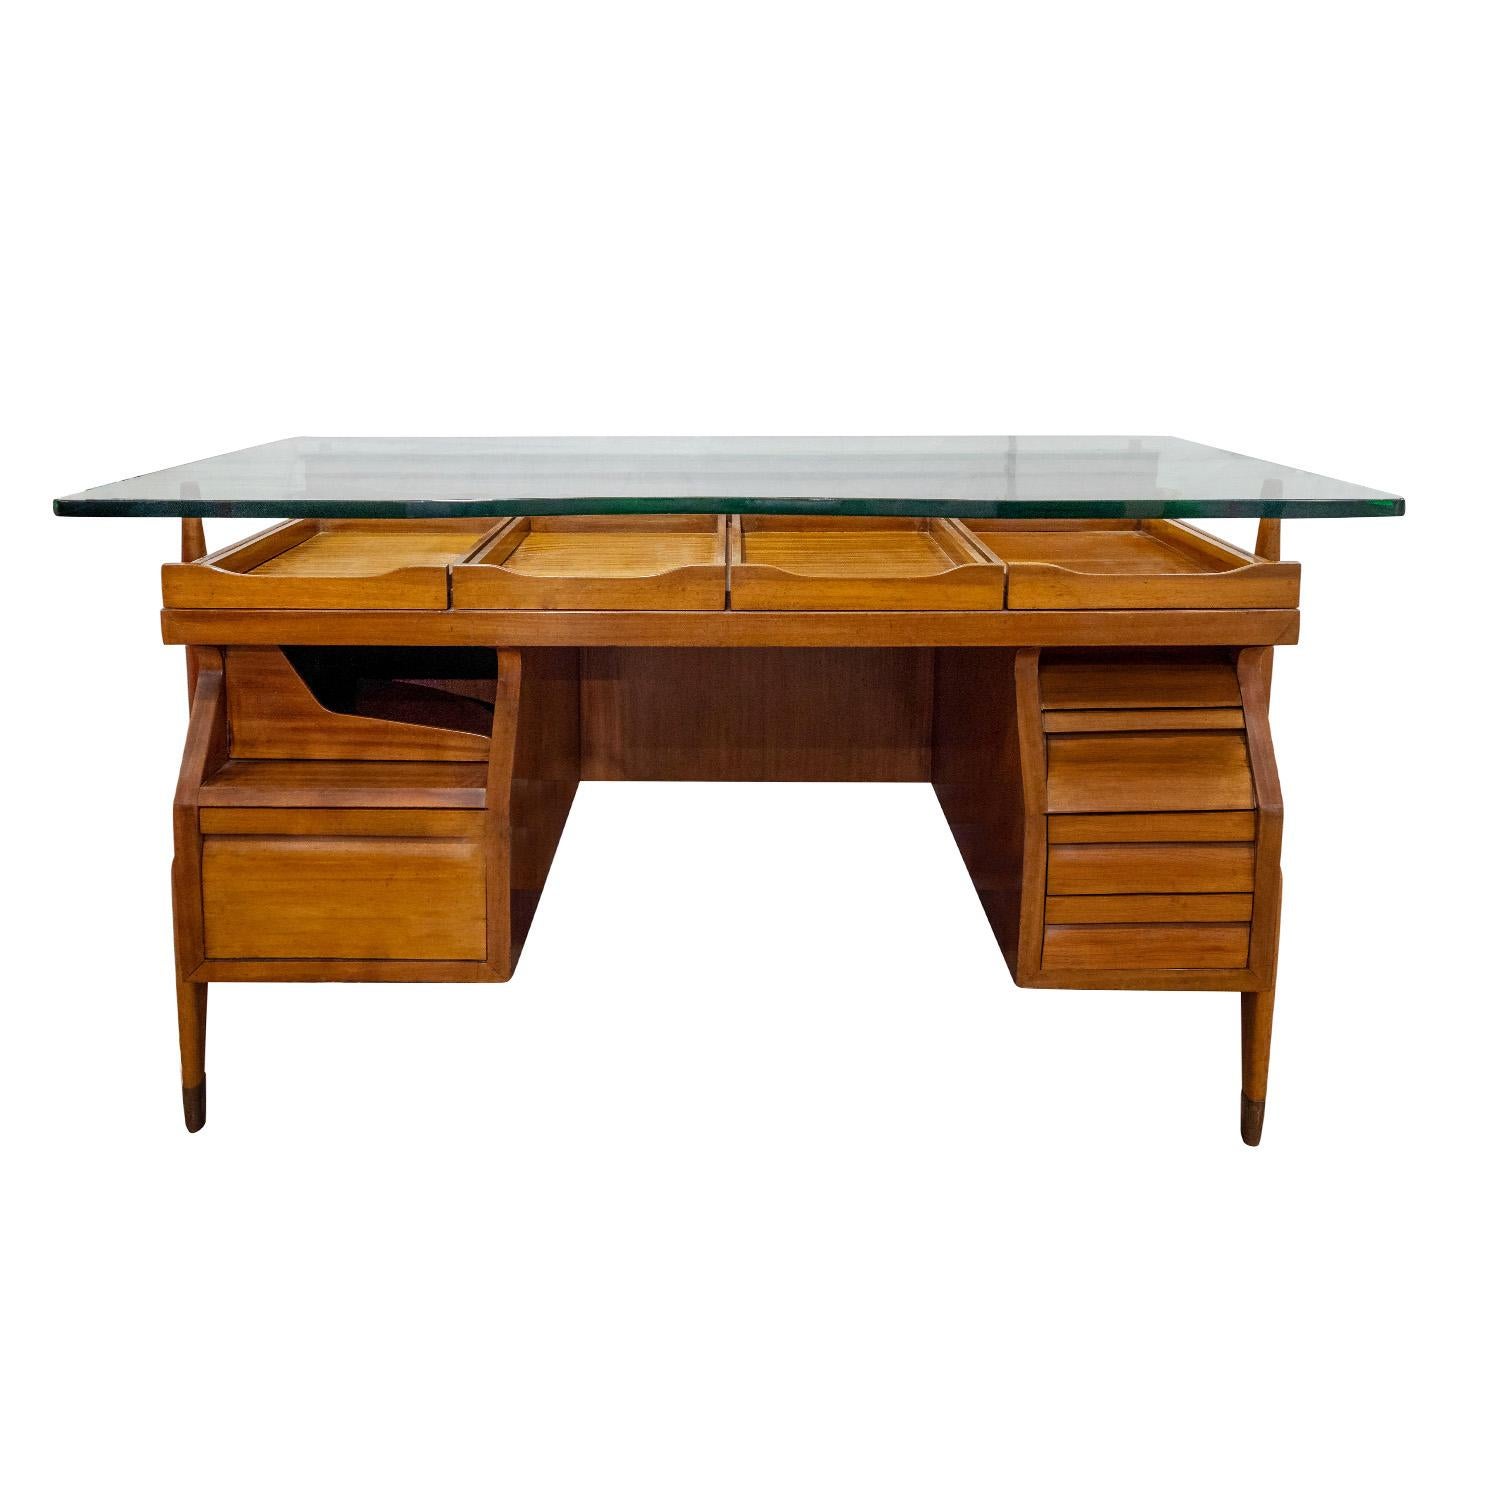 Architectural desk in walnut with sculptural legs with brass sabots and floating thick glass top attributed to Ico Parisi, Italian 1950's. This desk is beautifully outfitted with drawers, pull out trays and a swing out door for another compartment.